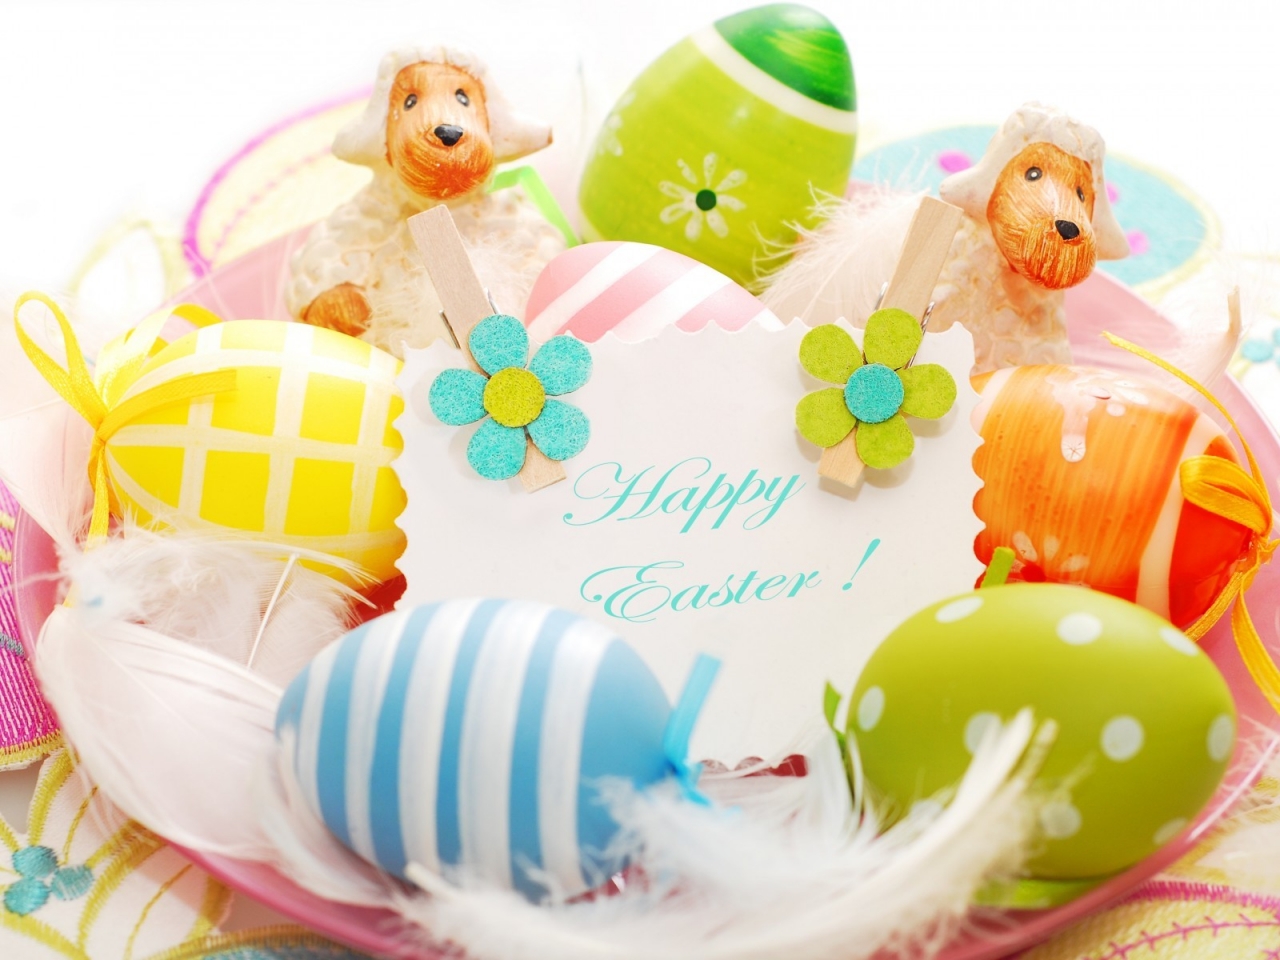 2014 Happy Easter Decorations for 1280 x 960 resolution